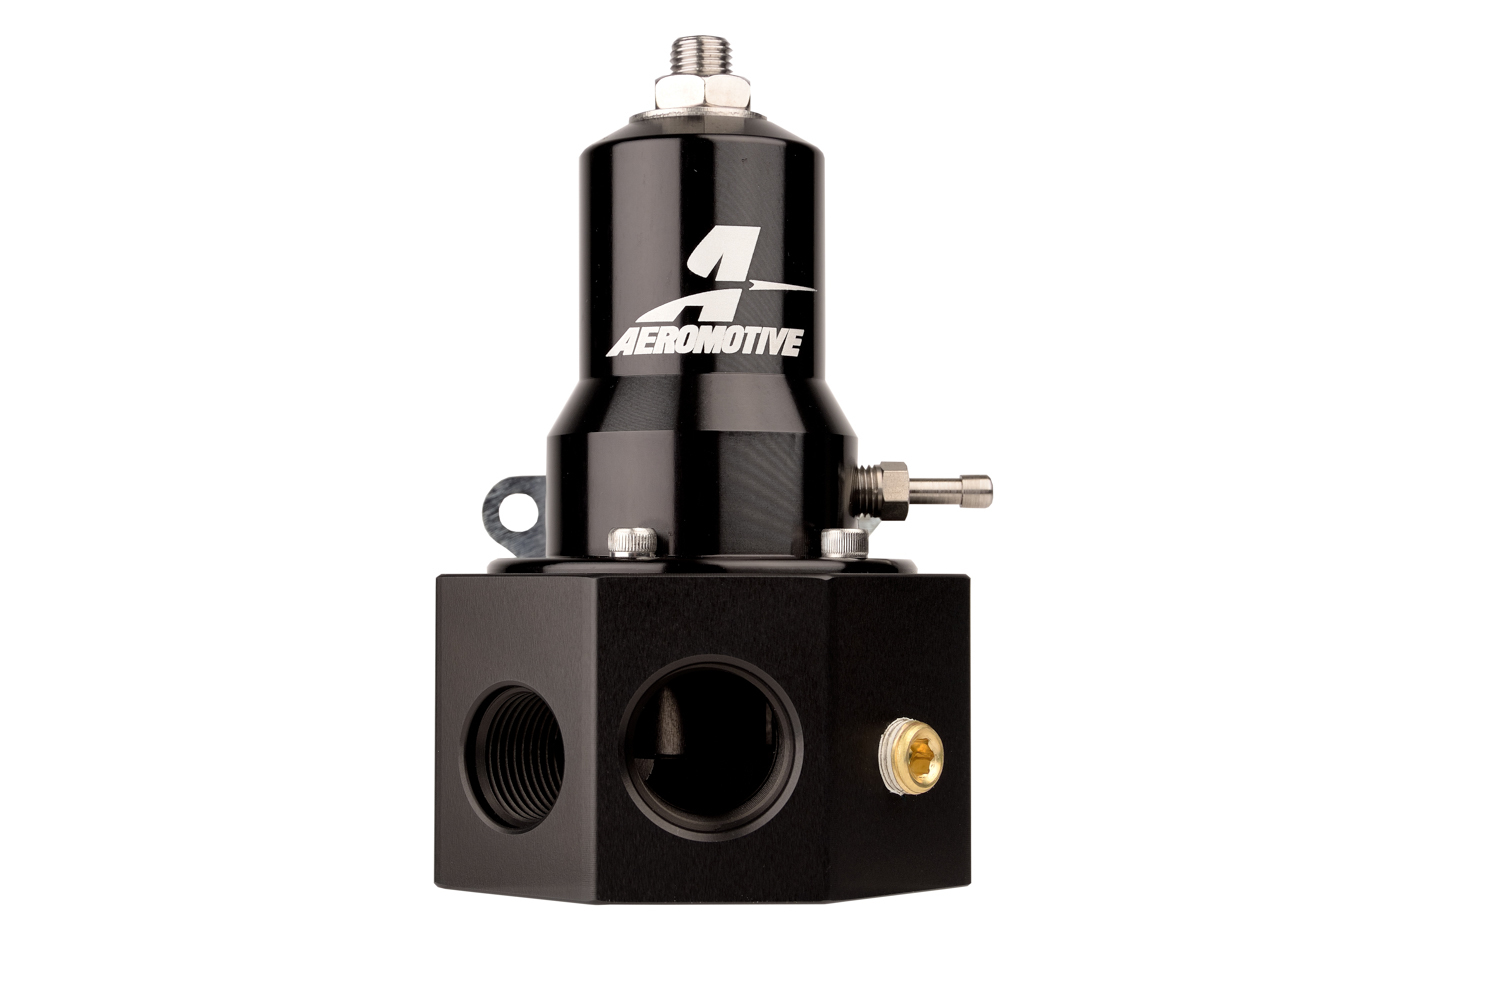 Aeromotive 13145 Fuel Pressure Regulator, Pro-Series EFI, 30 to 125 psi, In-Line, 10 AN Female O-Ring Inlet, 8 AN Female O-Ring Outlet, 10 AN Female O-Ring Return, 1/8 in NPT Port, Fittings Included, E85 / Gas / Diesel, Each